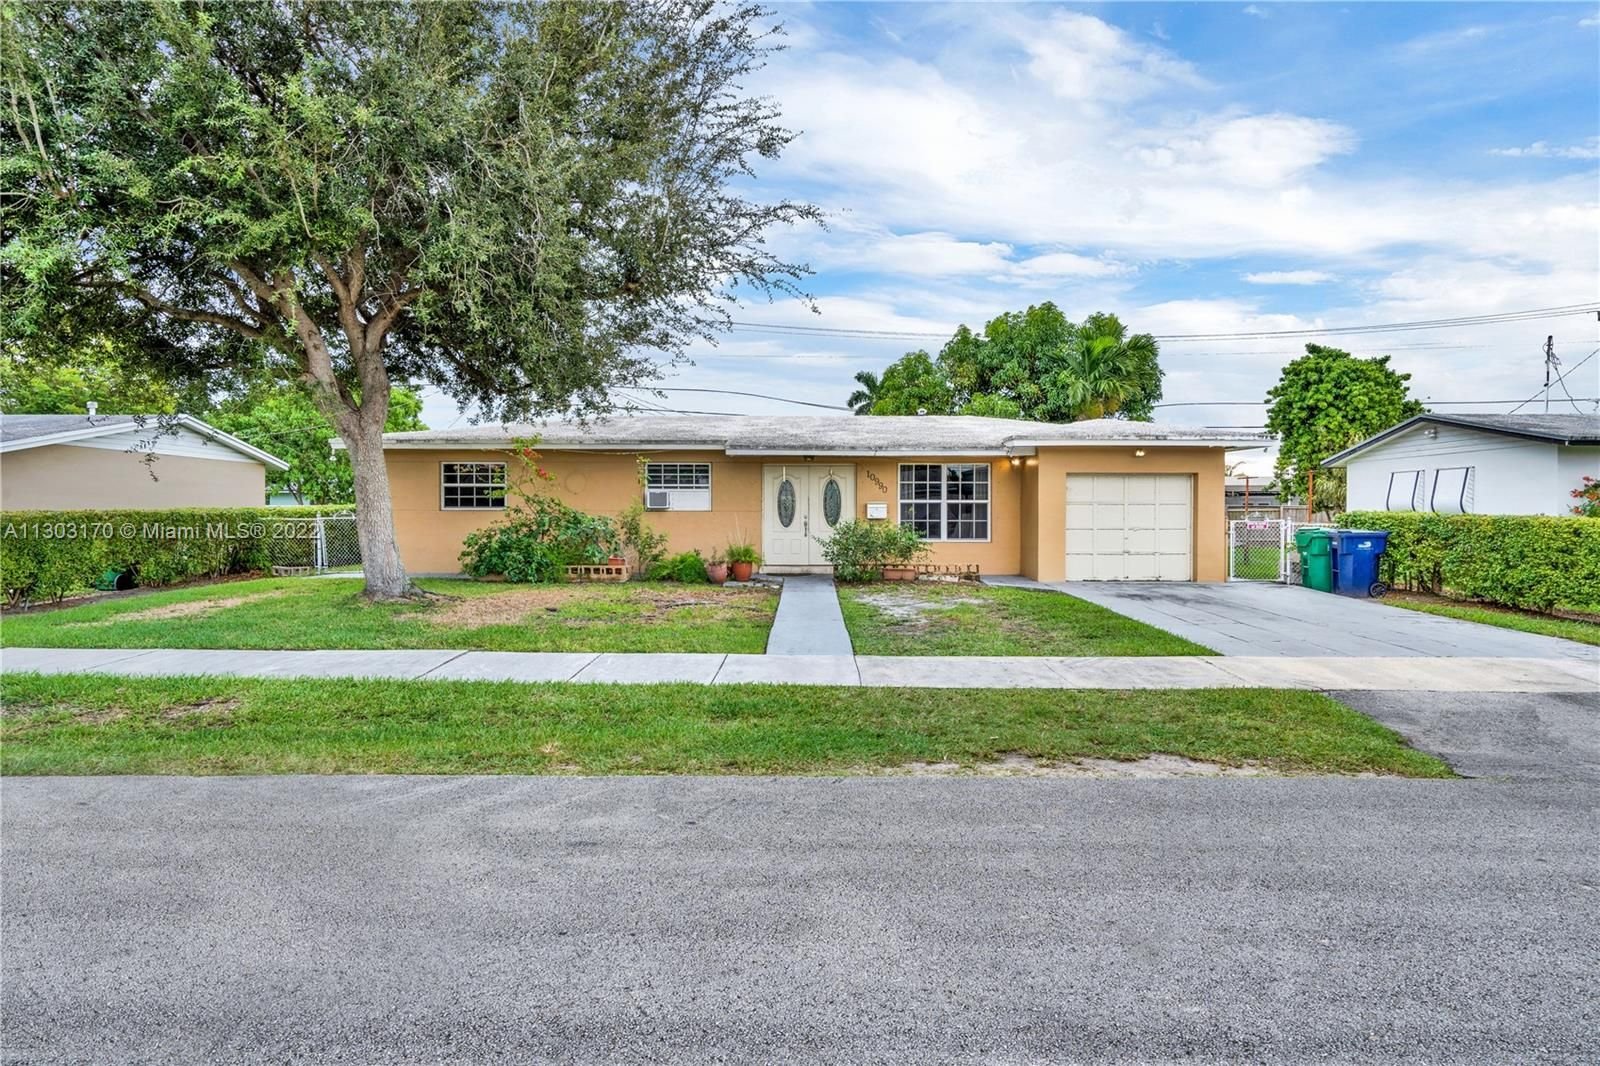 Real estate property located at 10990 63rd Ter, Miami-Dade County, Miami, FL